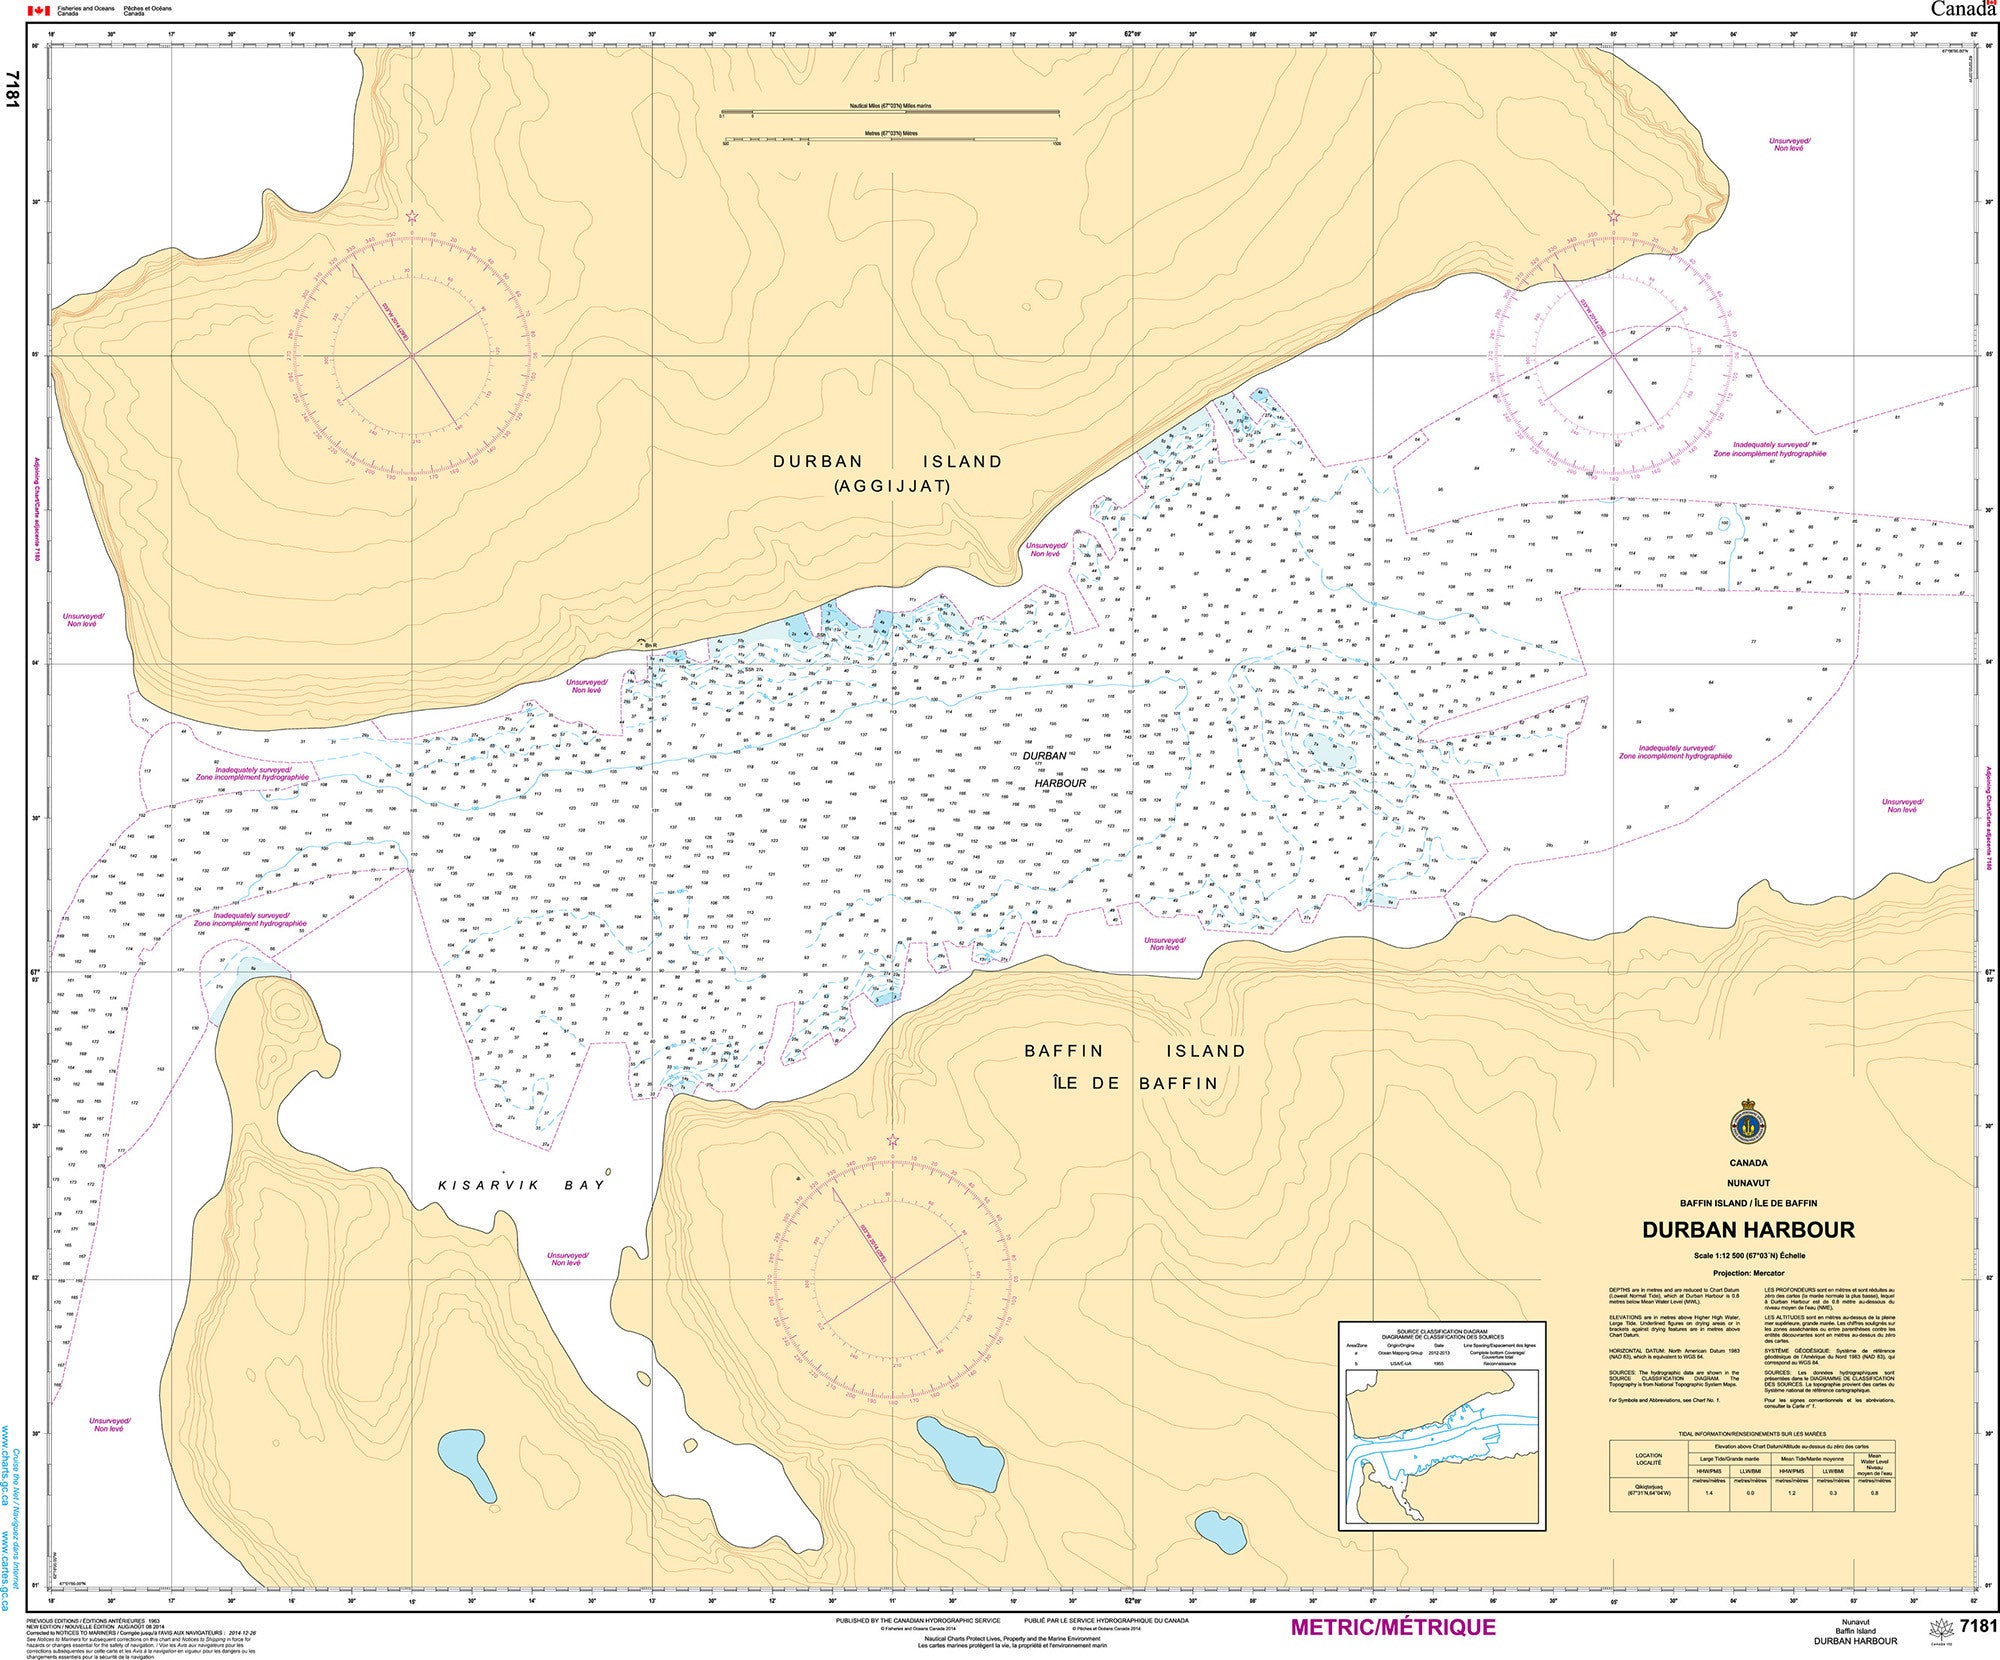 Canadian Hydrographic Service Nautical Chart CHS7181: Durban Harbour